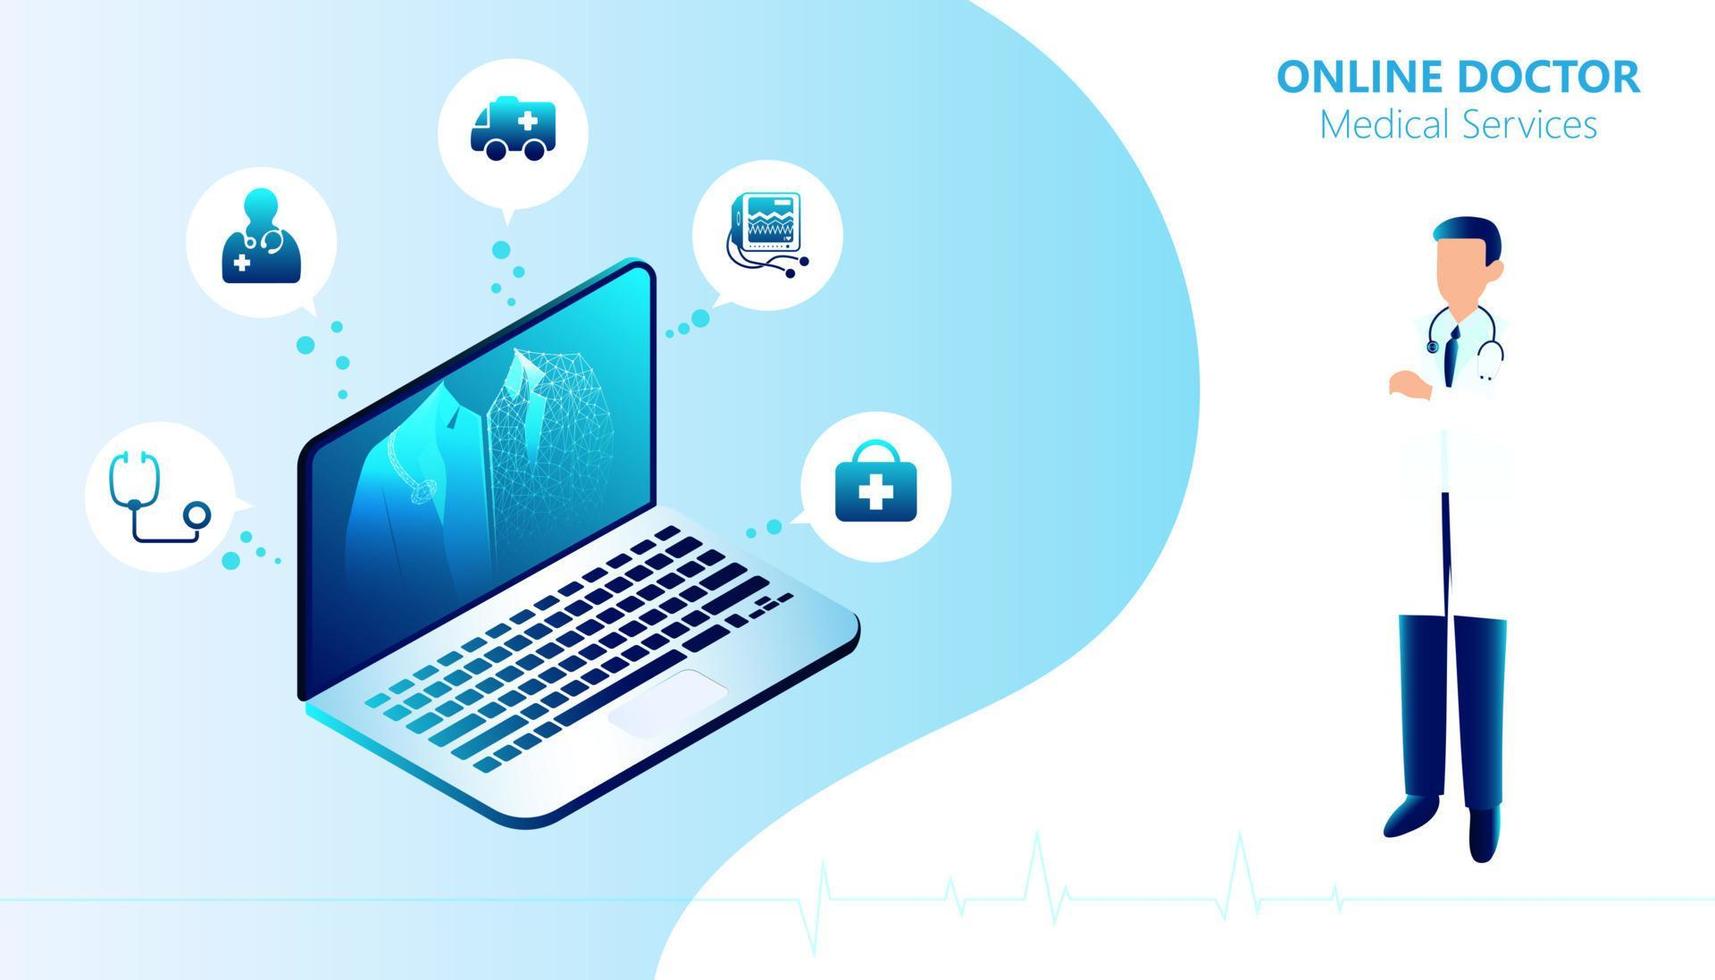 Abstract Online Doctor Medical Services concept Using the internet or online to consult a doctor Or requesting medical advice Via various devices such as mobile phones, tablets, computers. vector